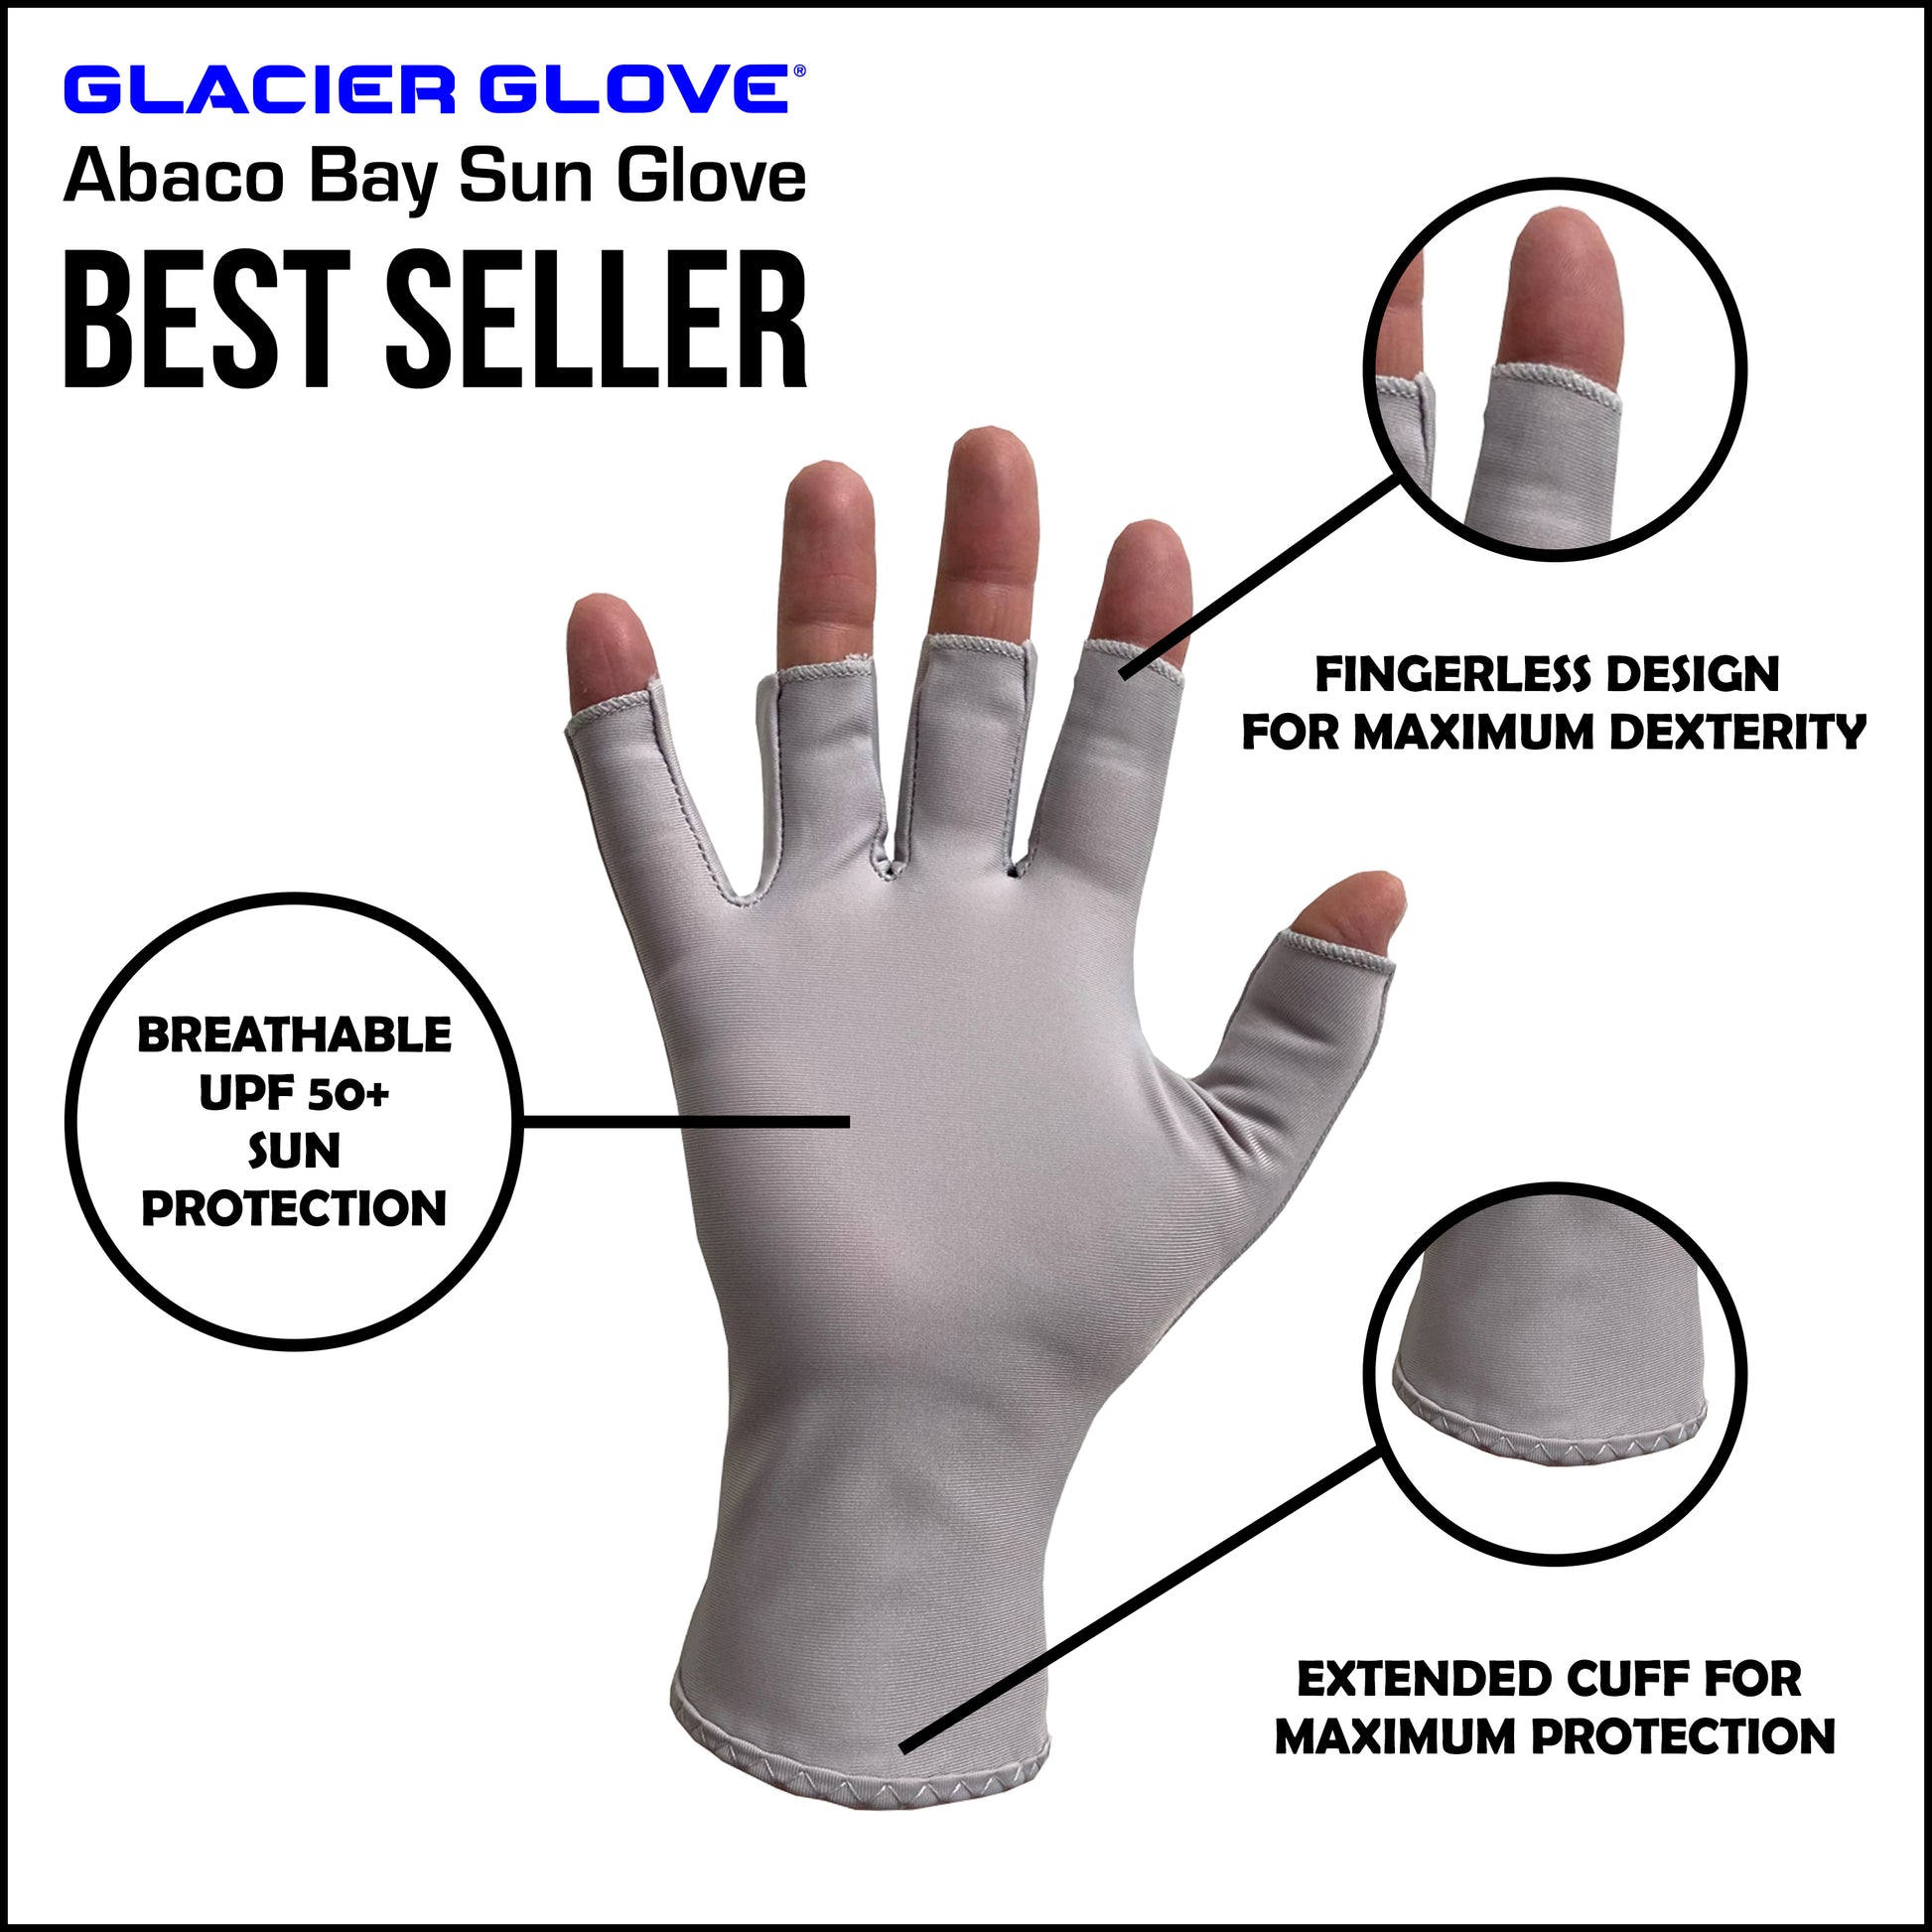 The Abaco Bay Sun Glove is the most popular model in our sun protection line. Independently tested and verified, it is rated at the maximum protection of UPF 50+. Providing both hand and wrist protection, this glove is great for any of your outdoor adventures.